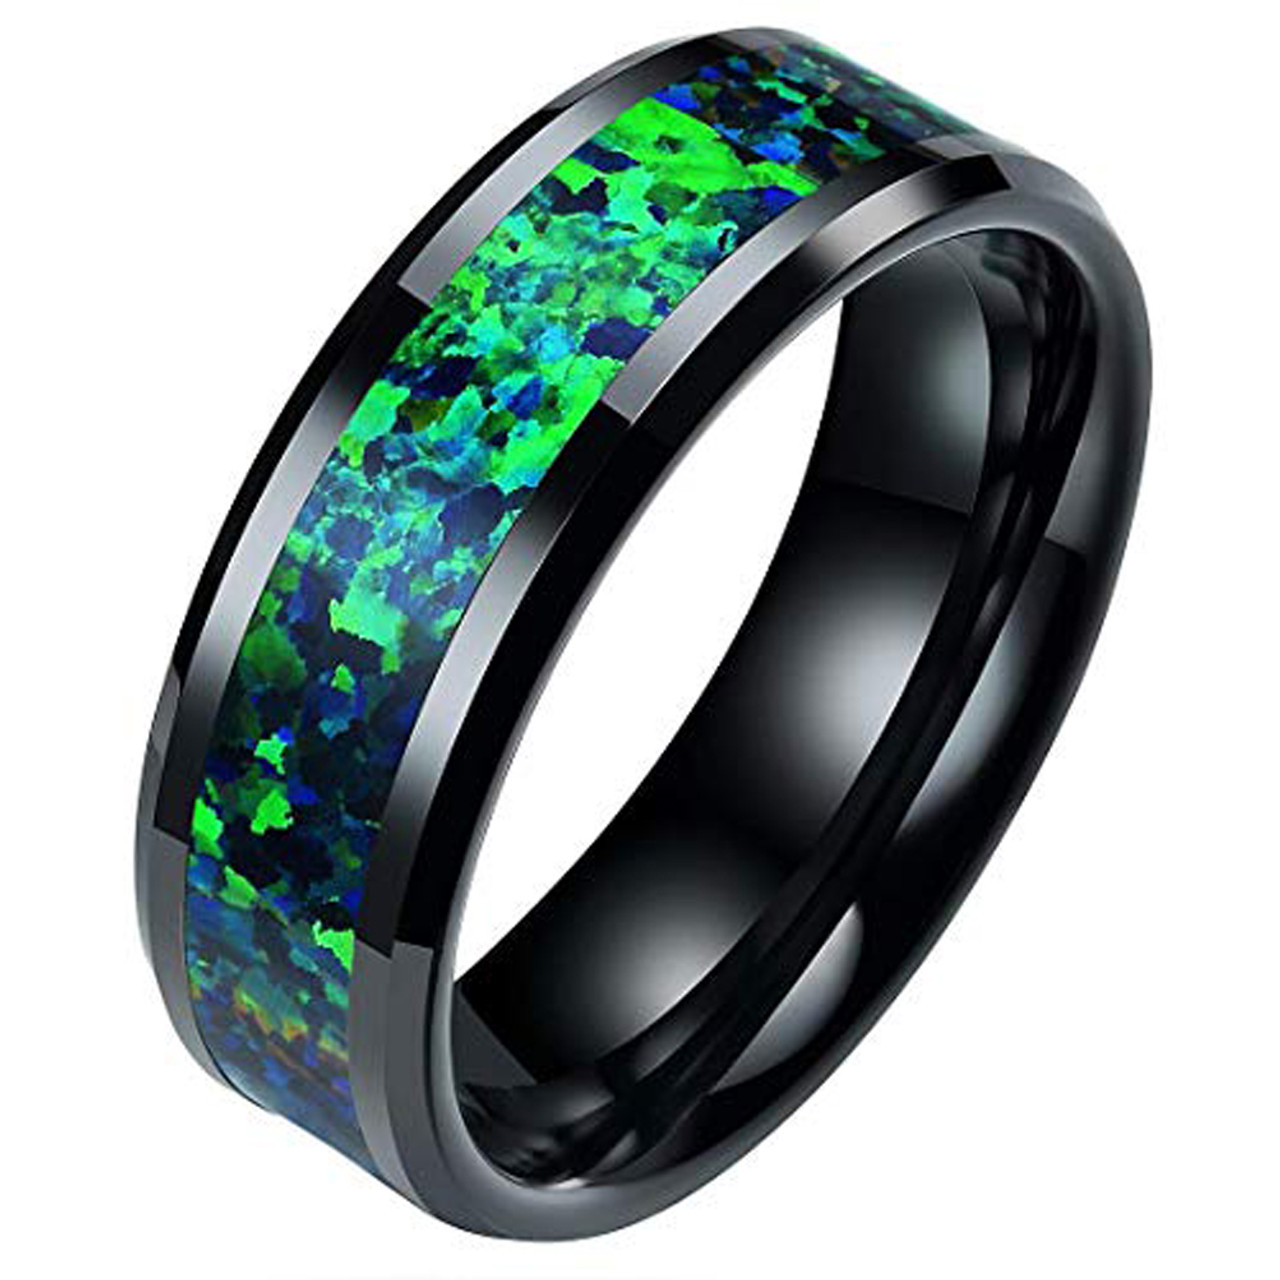 (8mm) Unisex or Men's Ceramic Wedding Ring Bands. Black Ring with Green Blue Opal Inlay.